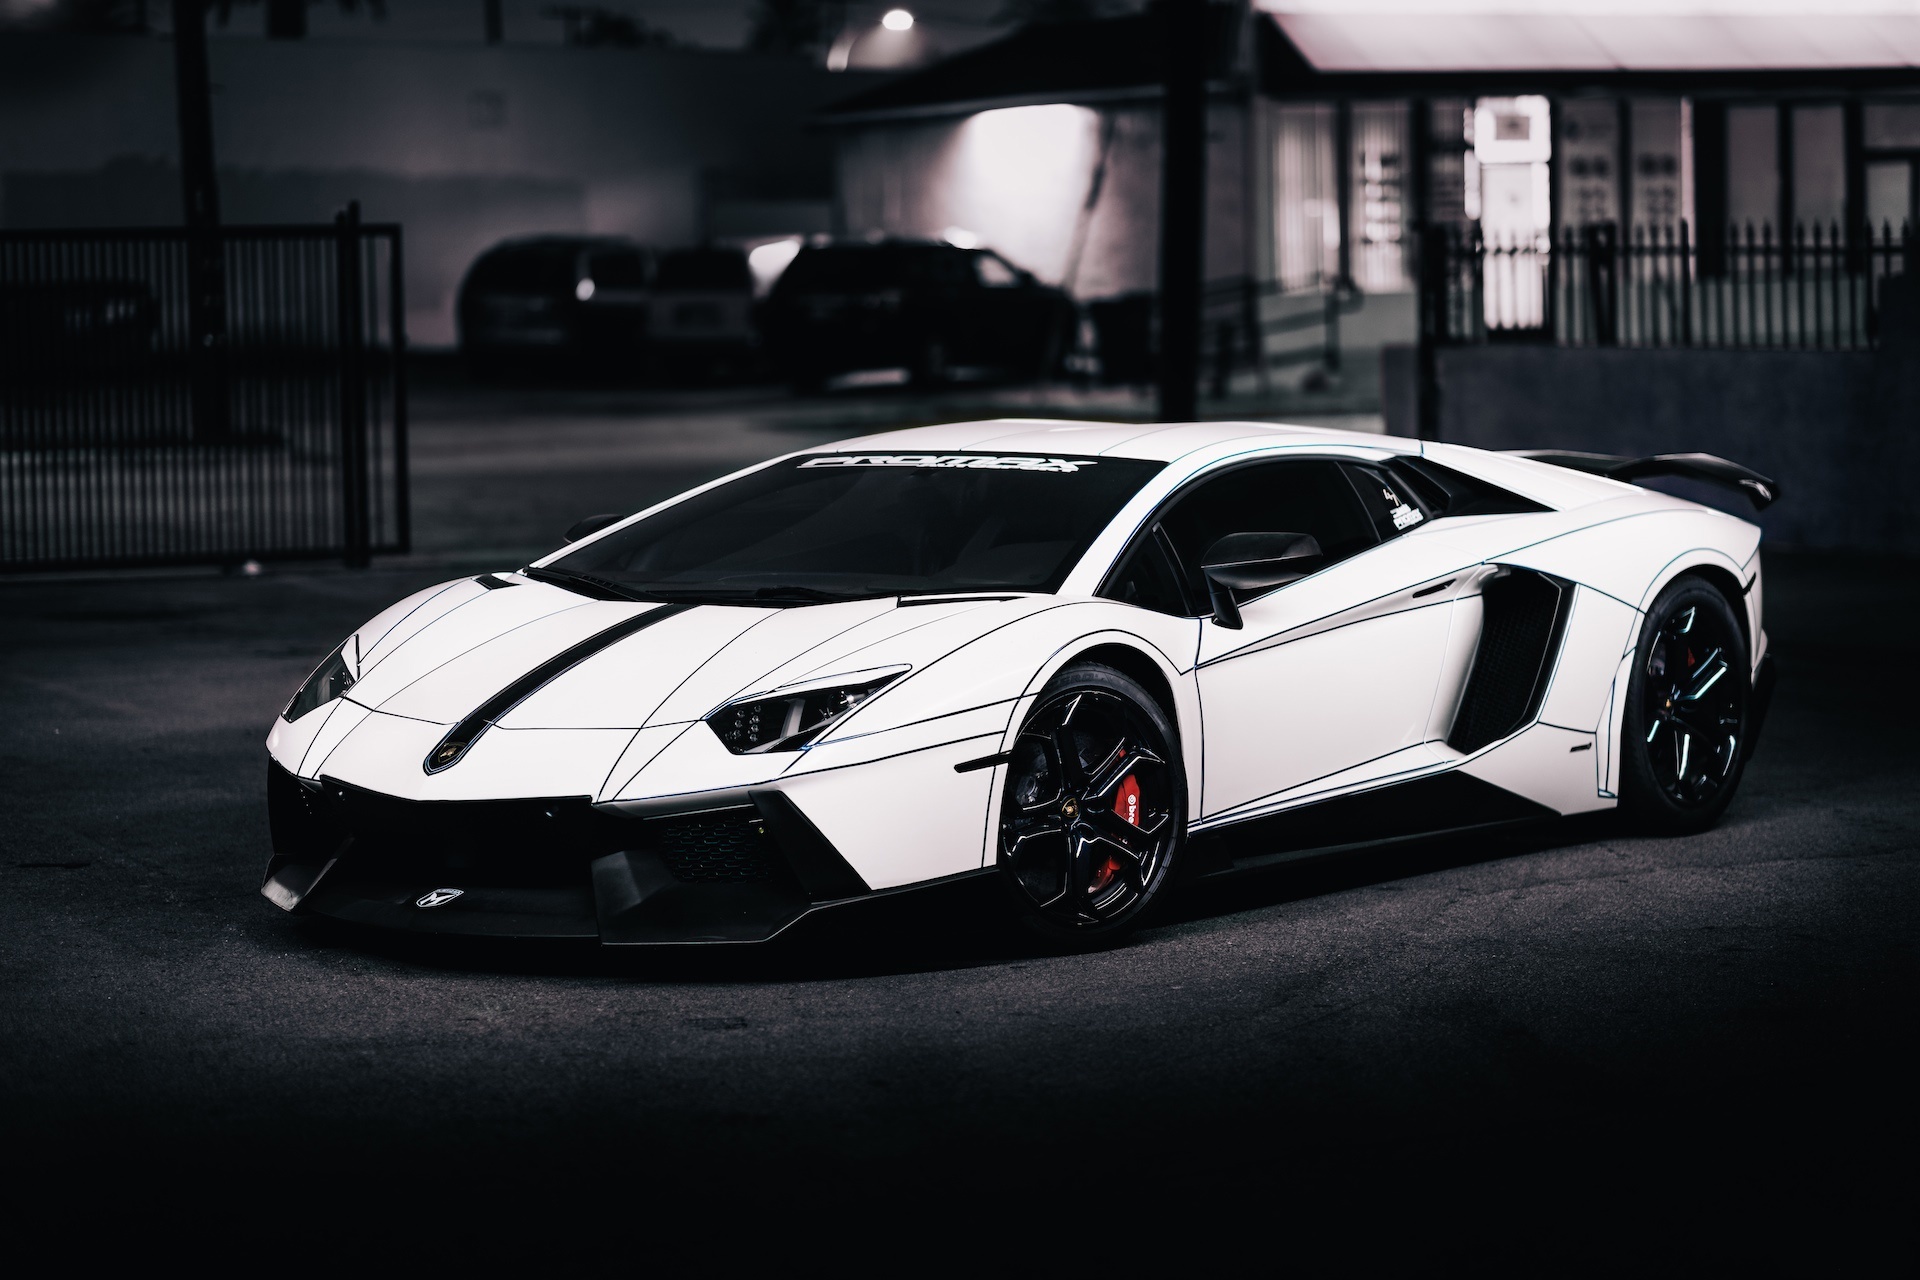 Popular Aventador images for mobile phone